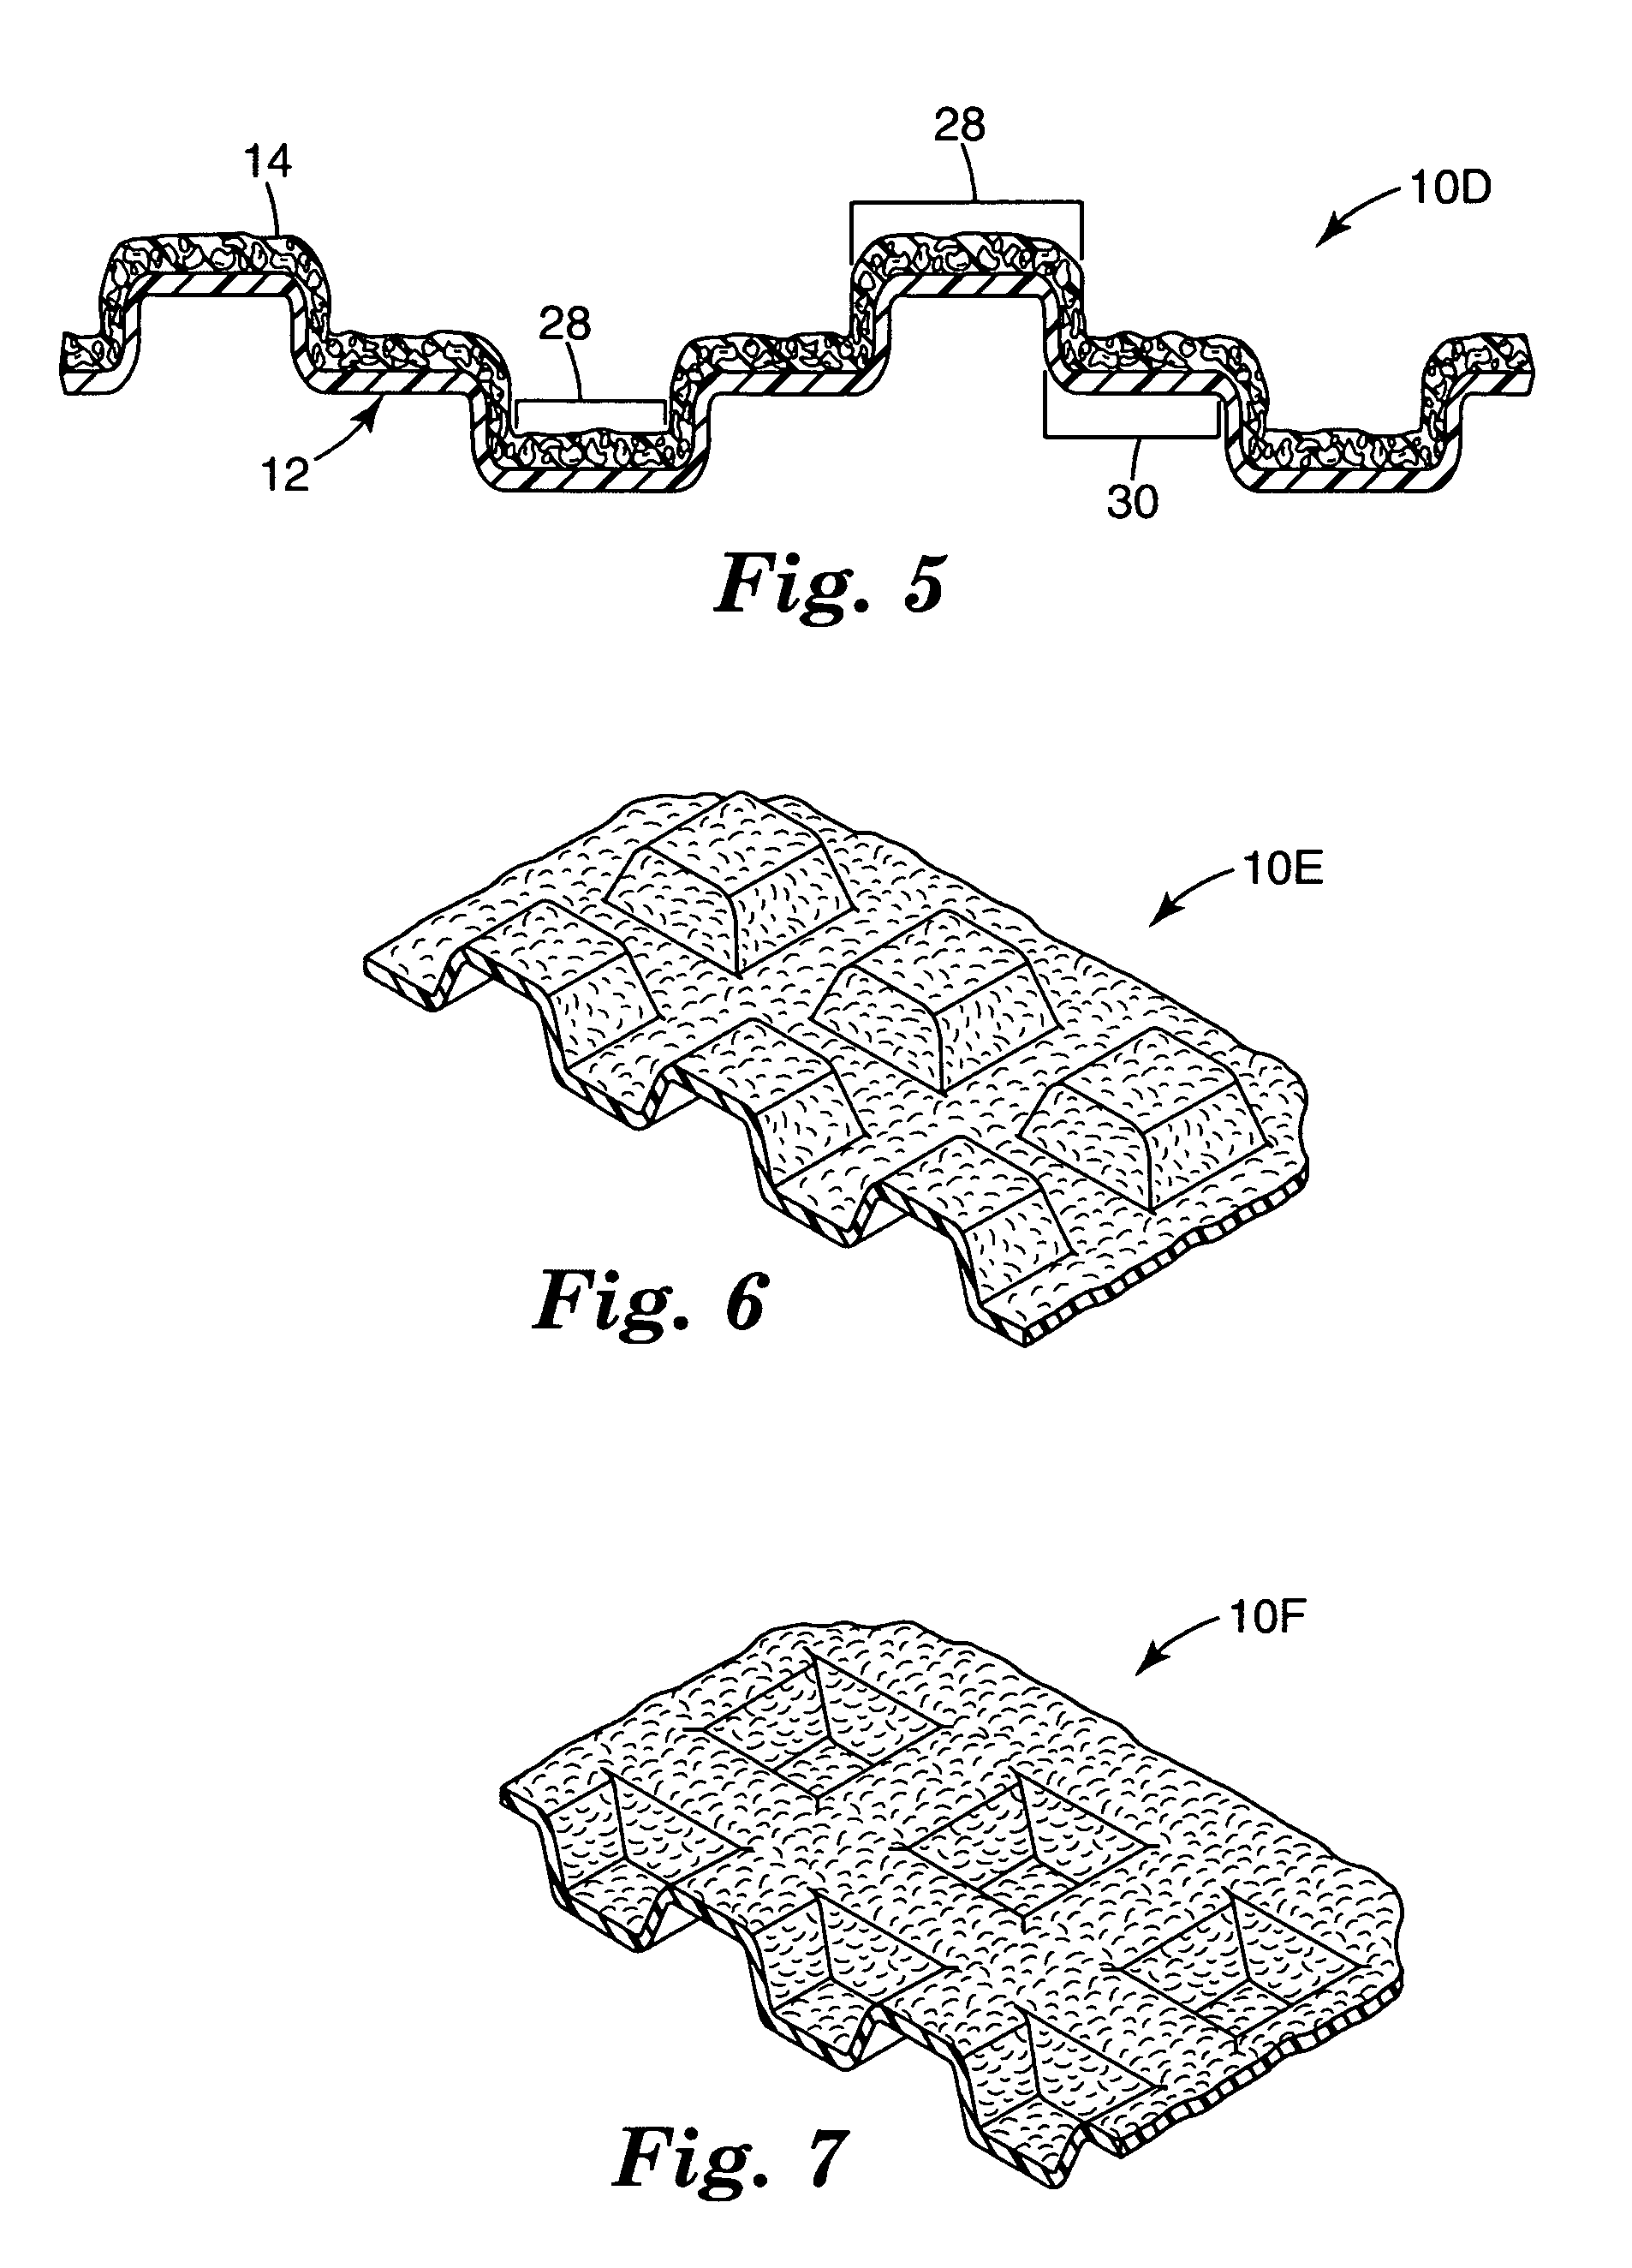 Nonwoven abrasive articles and methods